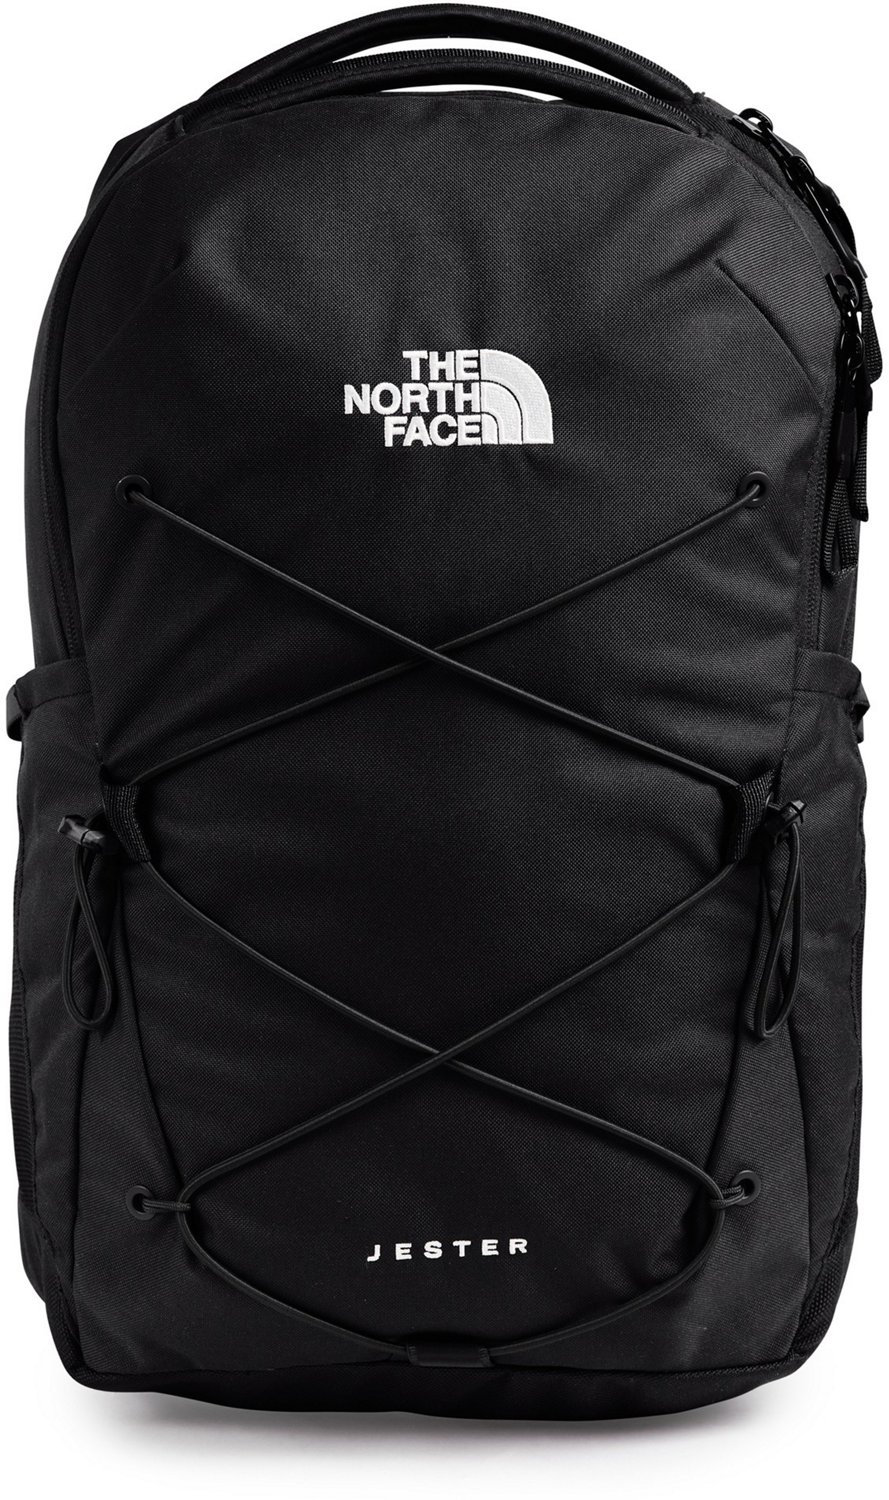 The North Face Women's Jester Backpack                                                                                           - view number 1 selected